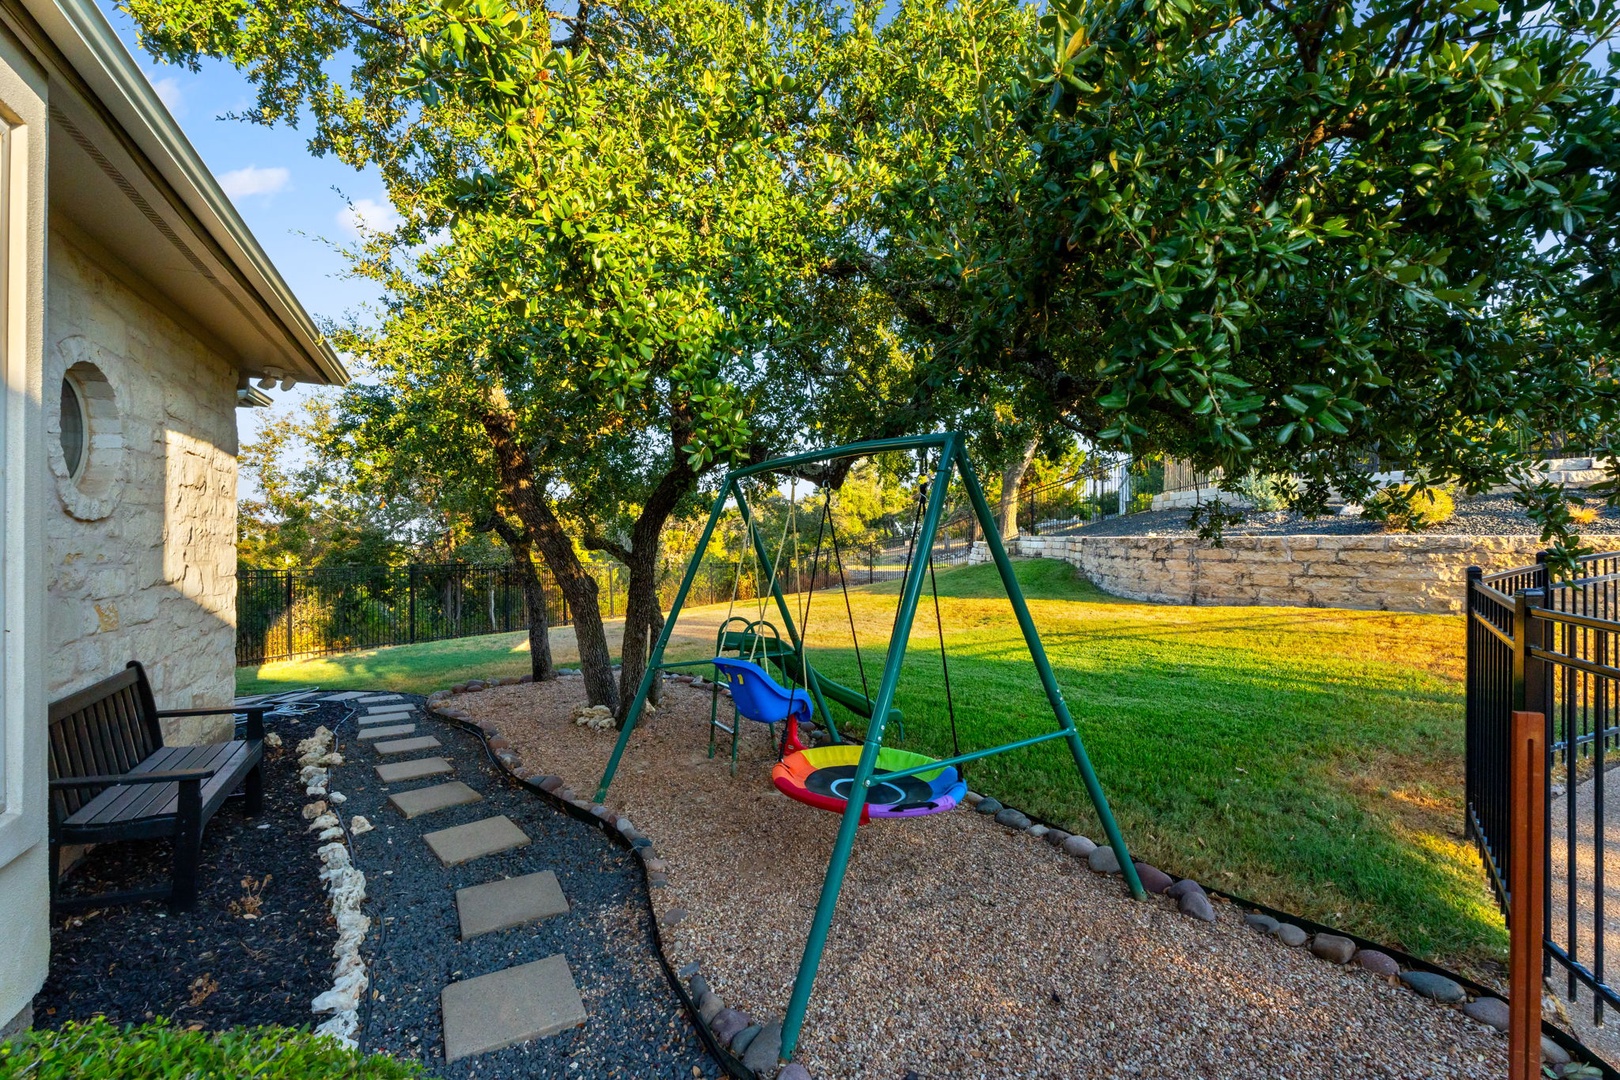 The yard offers ample space for relaxation & play for the whole family